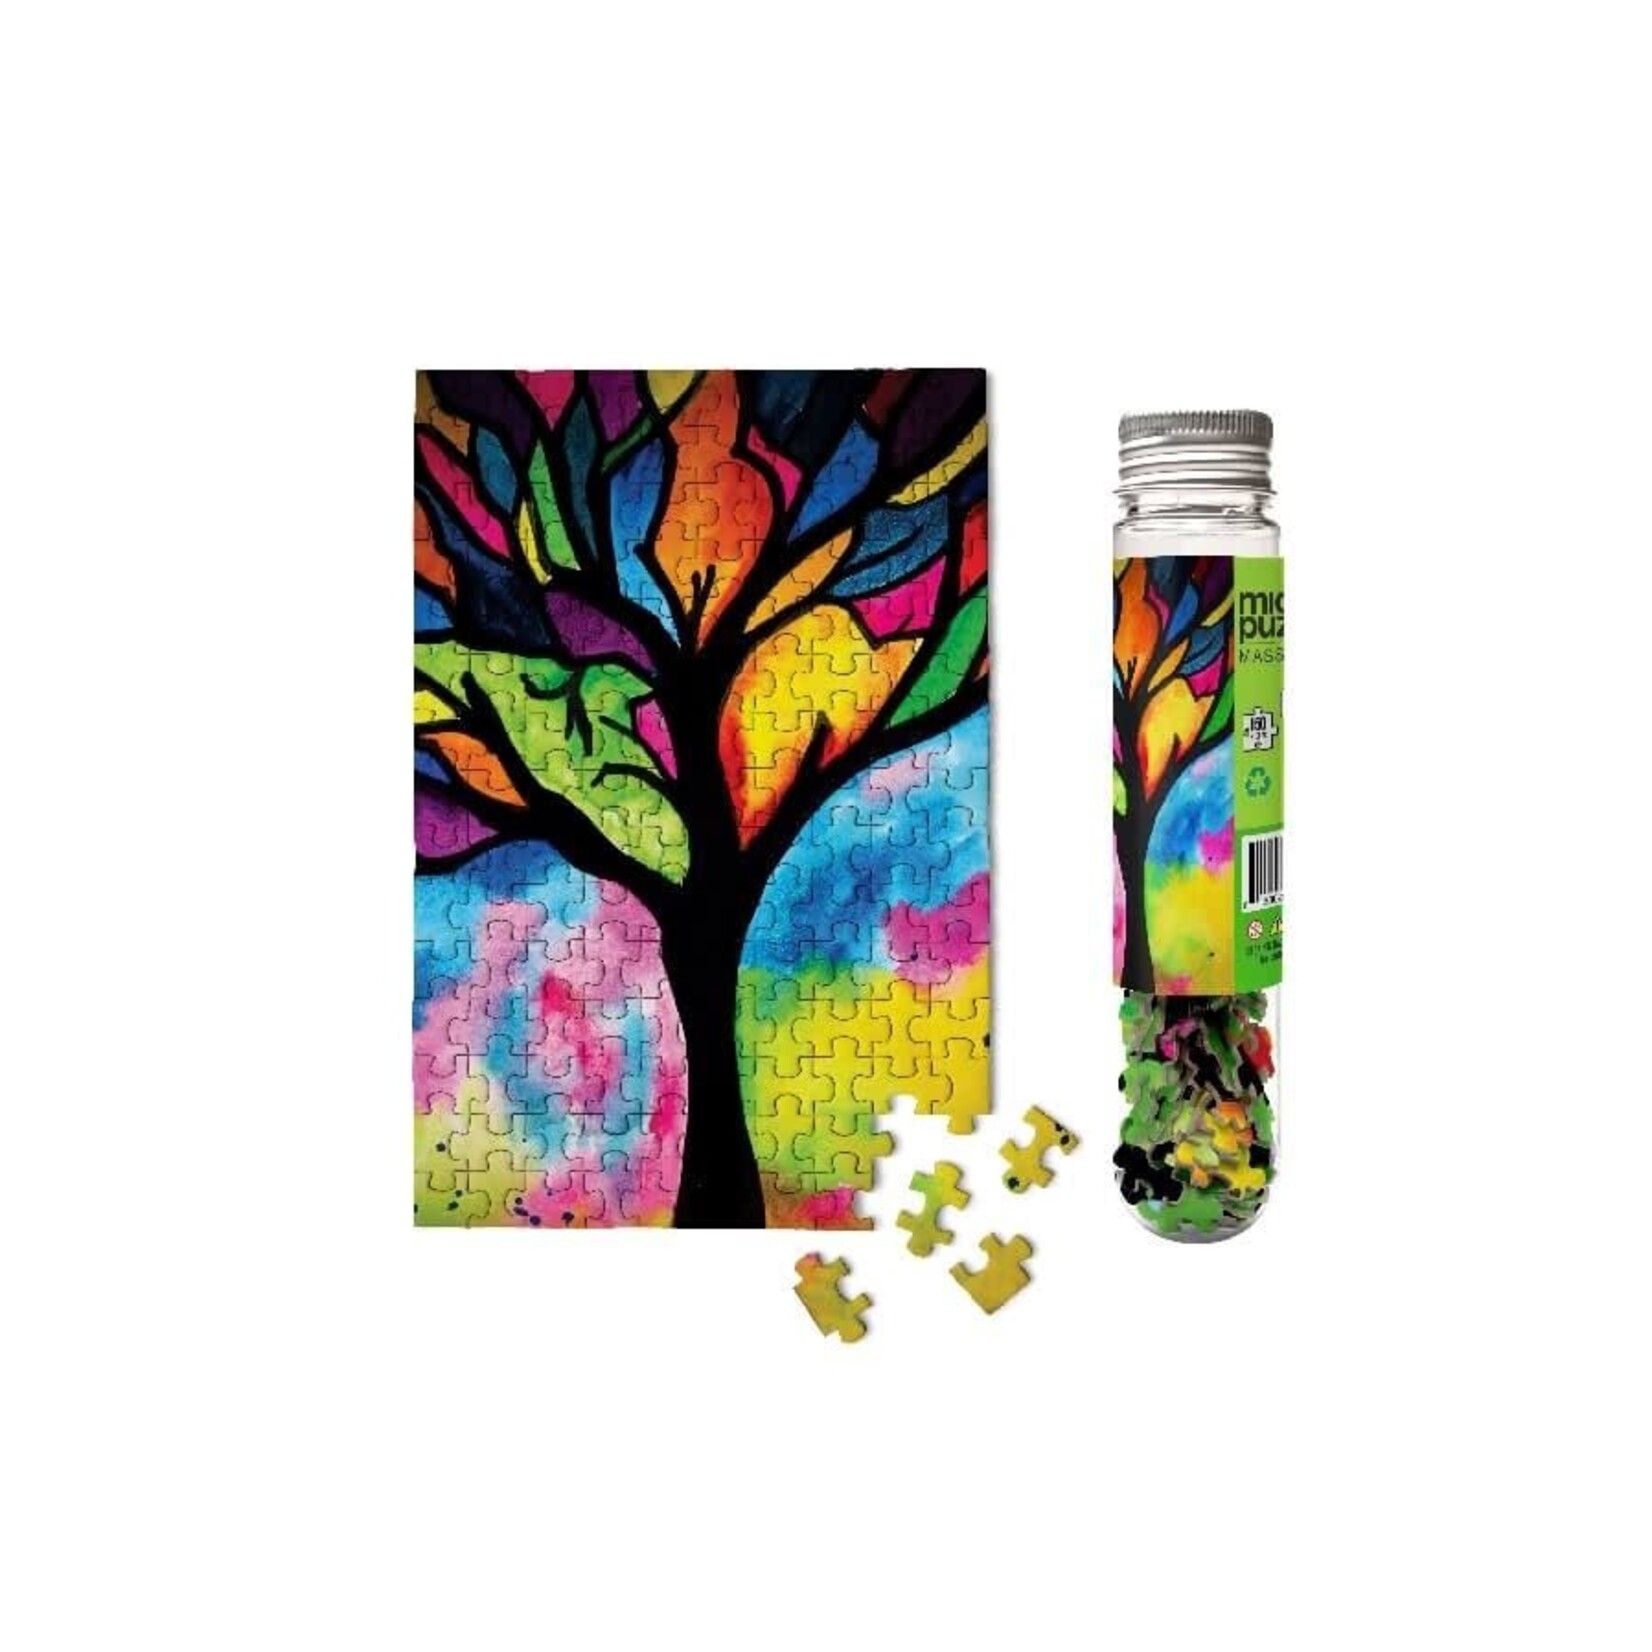 MicroPuzzles MicroPuzzles: Stained Glass Tree - 150 Piece Mini Jigsaw Puzzle